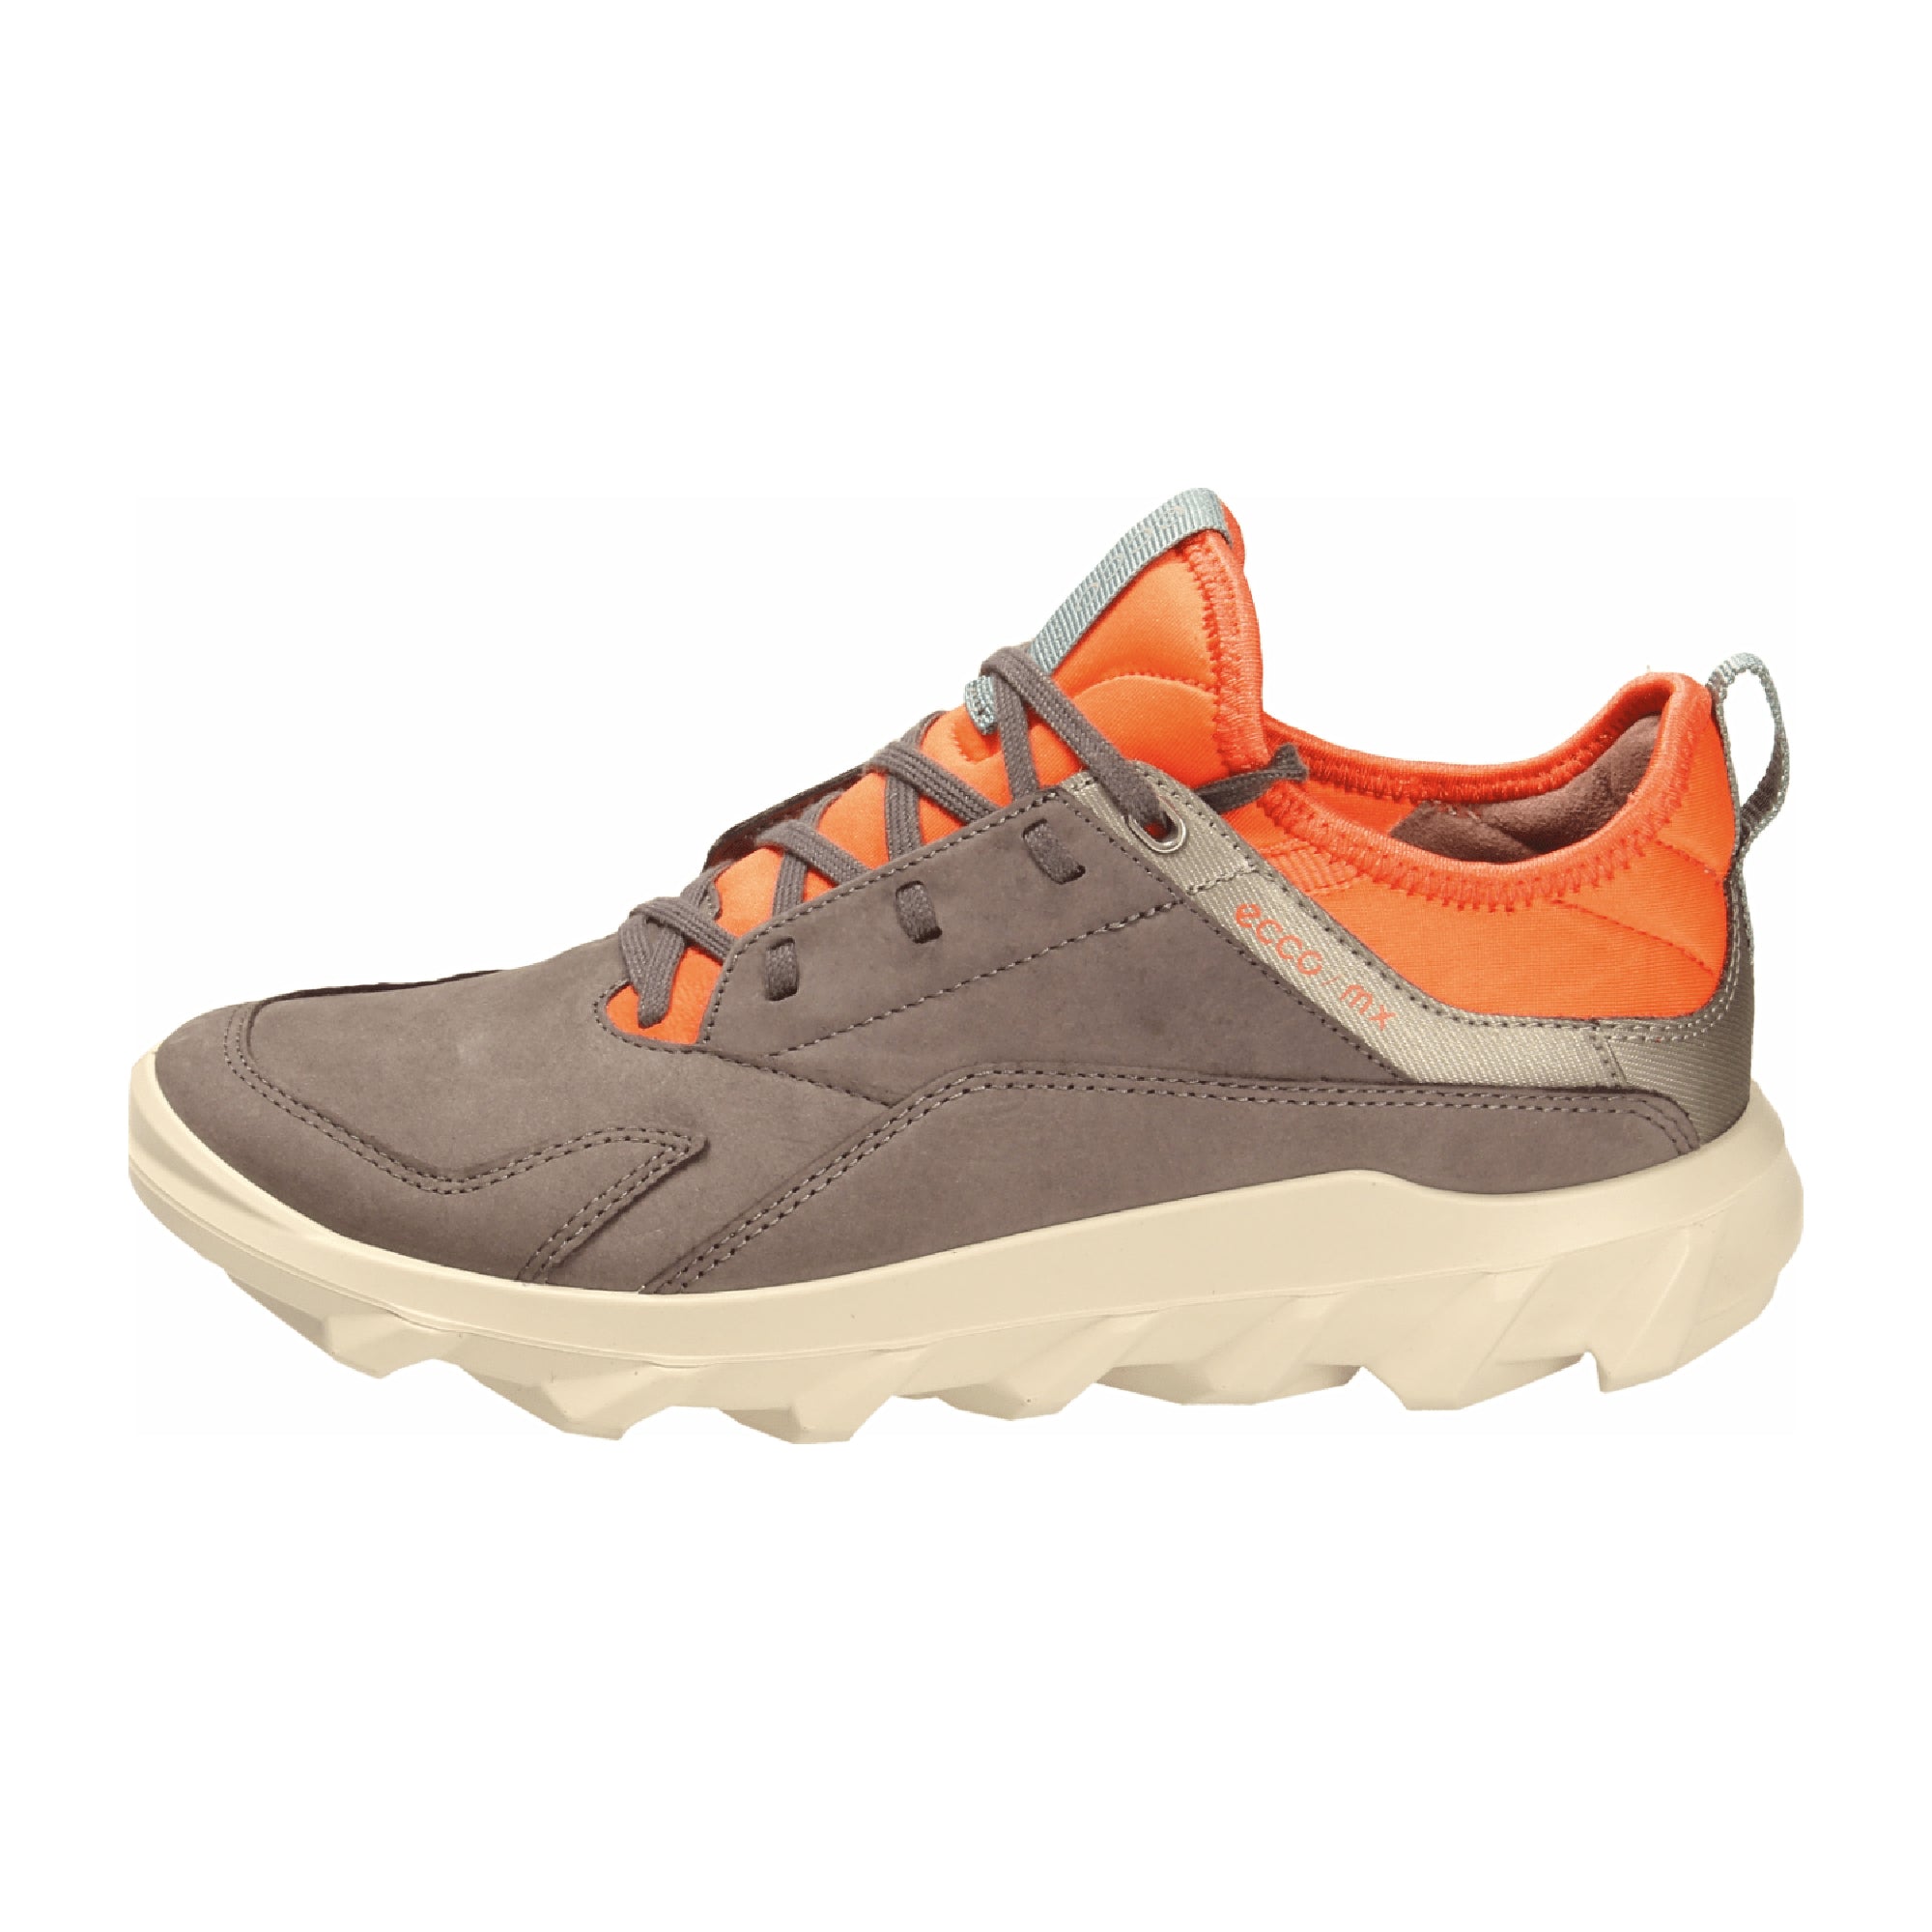 Ecco MX Women's Sneakers 82018 - Stylish Grey & Orange Casual Shoes for Everyday Comfort